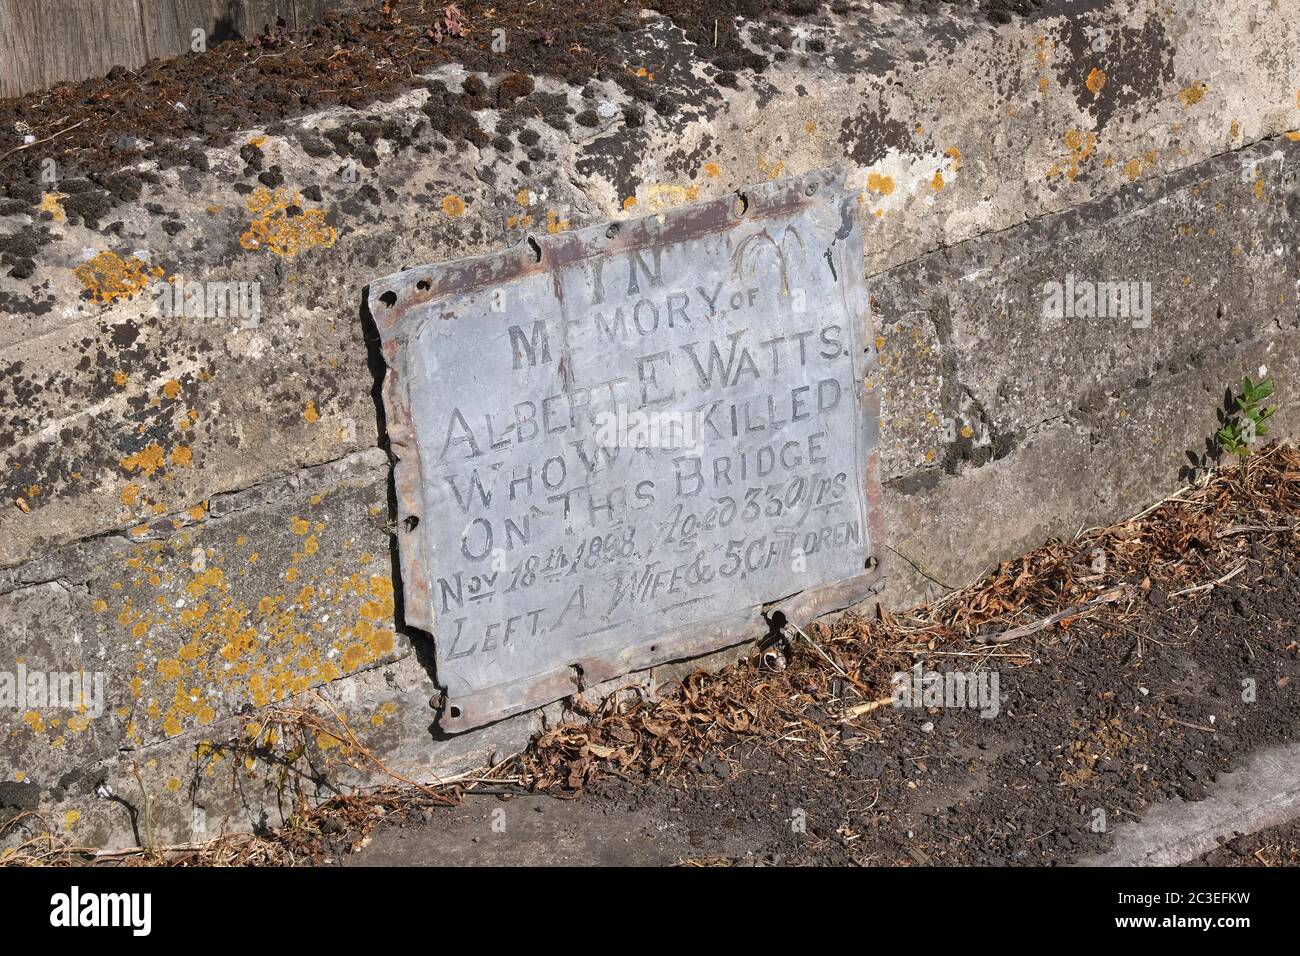 June 2020 - Old memorial plaque to Albert E Watts who died on this bridge in rural Somerset. Stock Photo